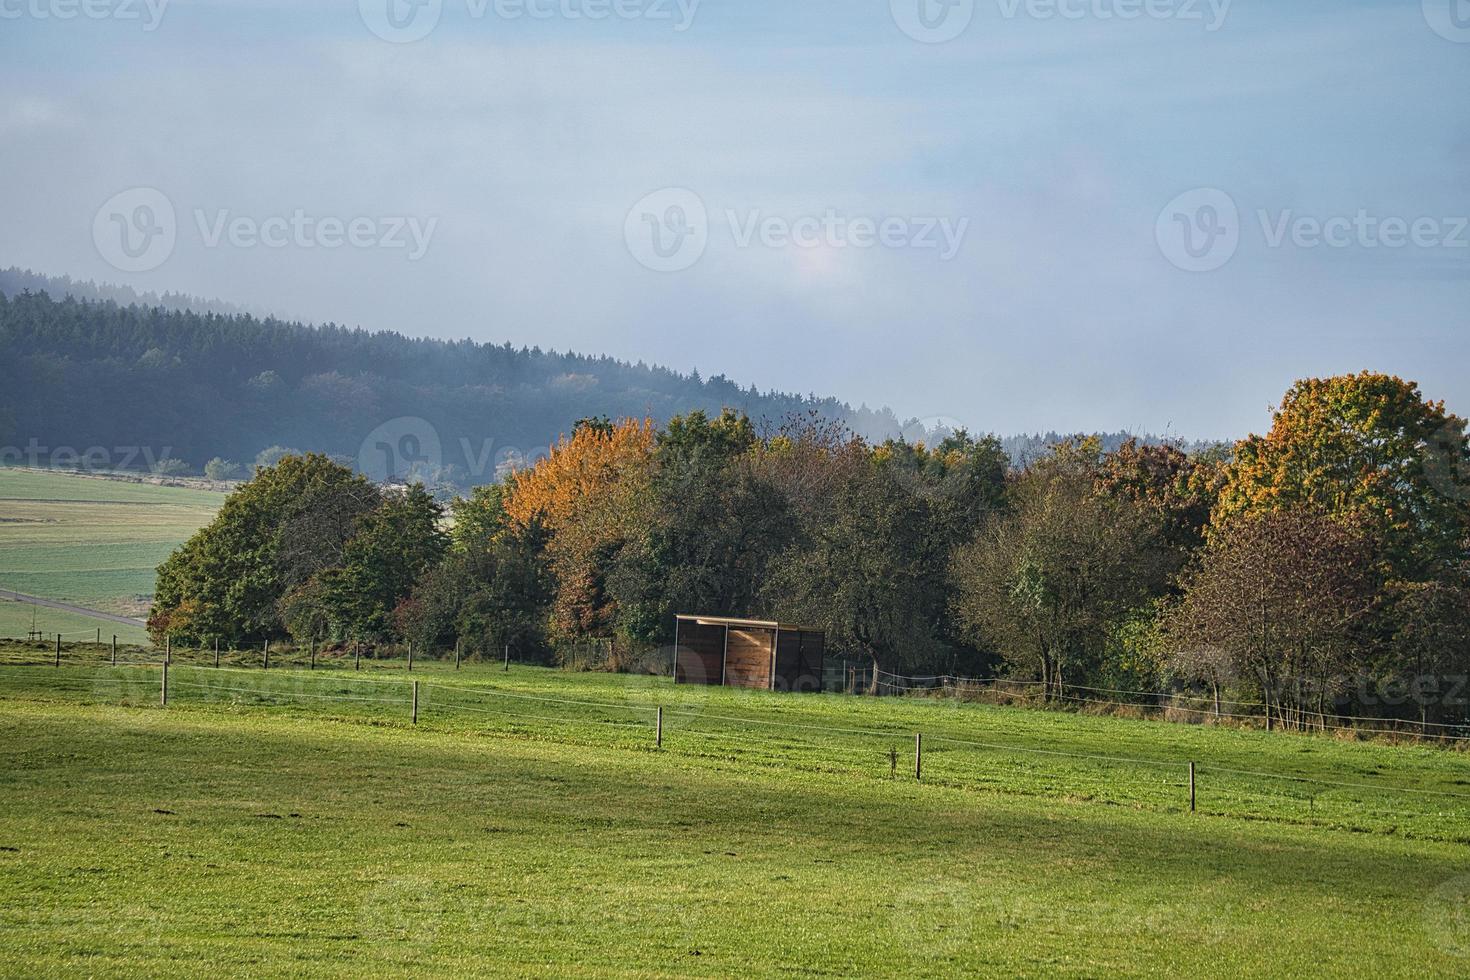 In Saarland forests, meadows and solitary trees in autumn look. photo